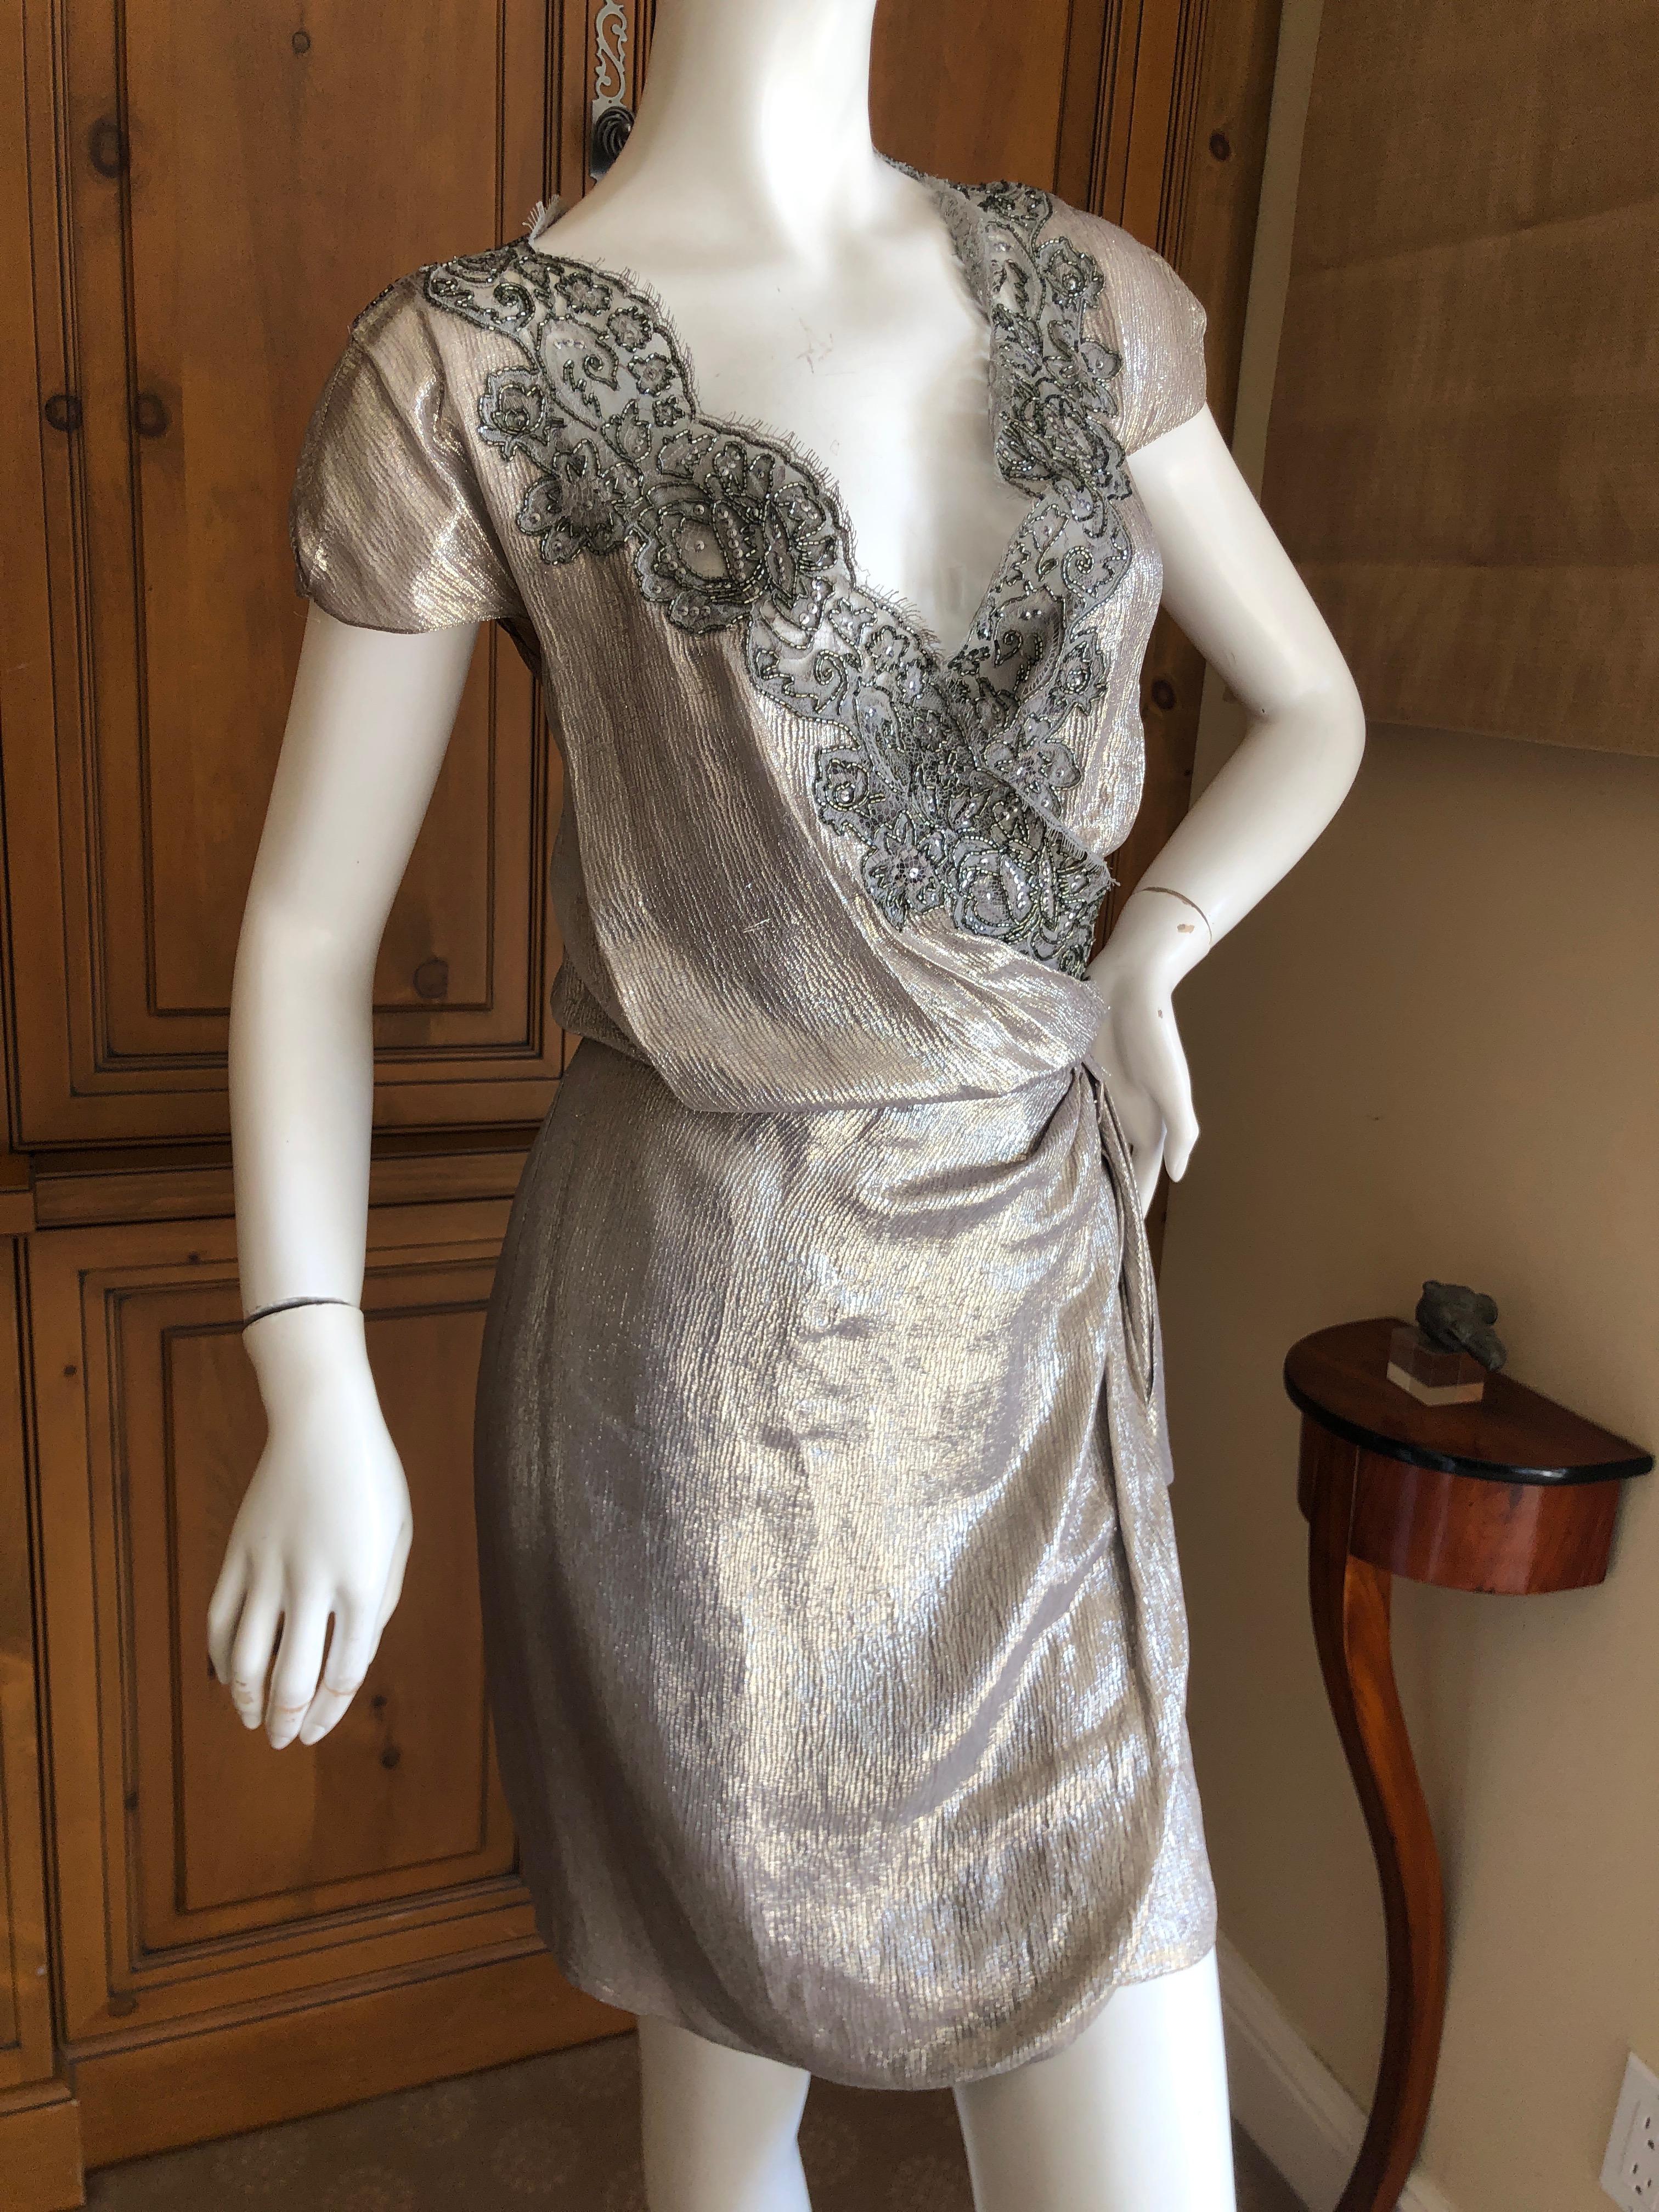  Christian Dior by Gianfranco Ferre Bead Embellished Metallic Wrap Dress  For Sale 2